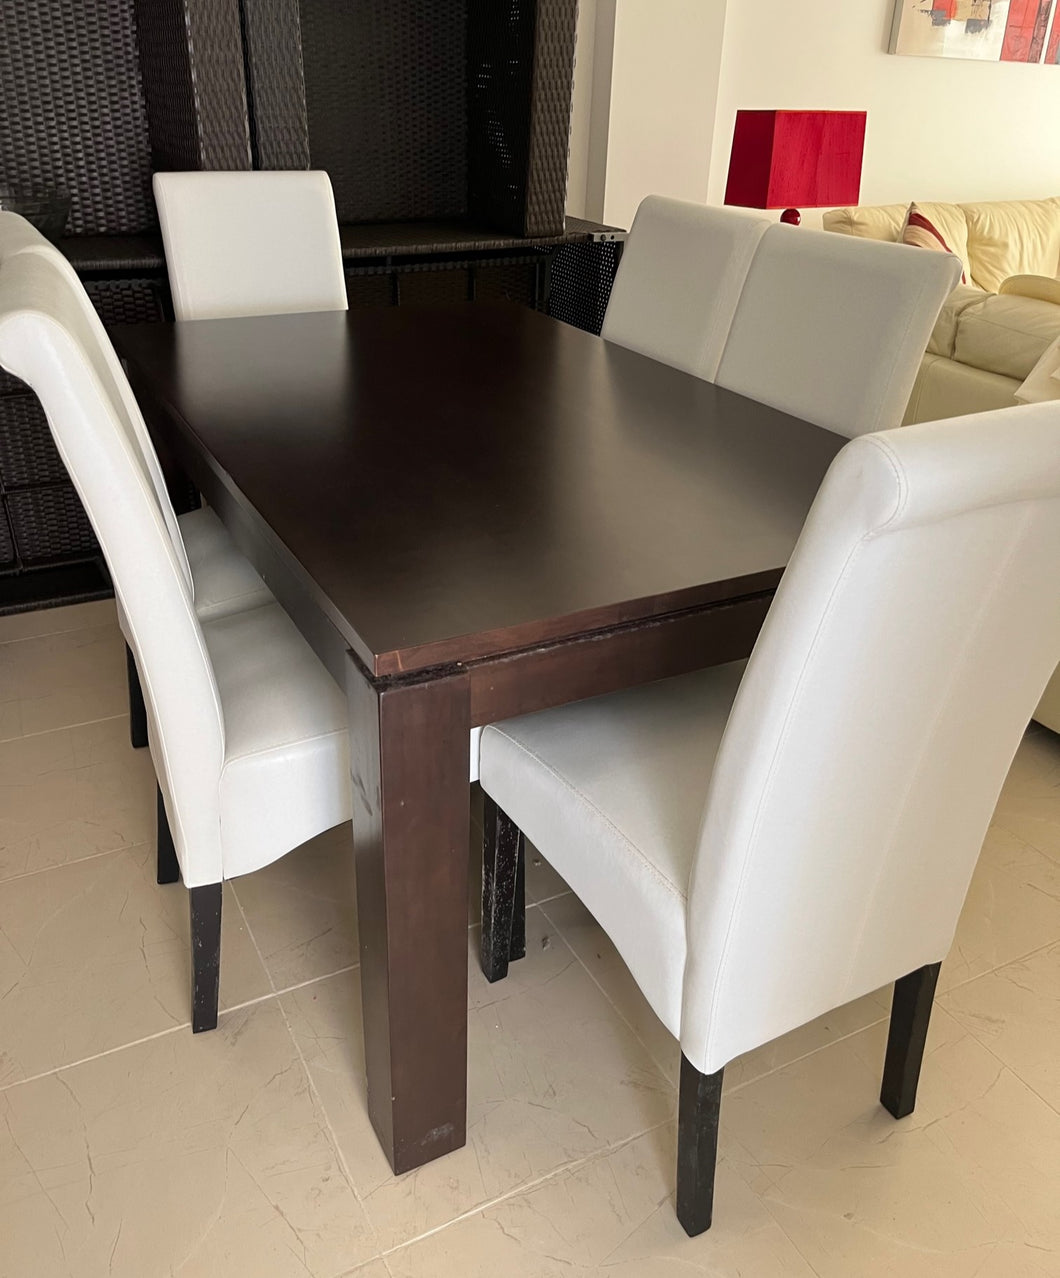 1039 - Wooden dining table + 6 white leather chairs in very good condition.